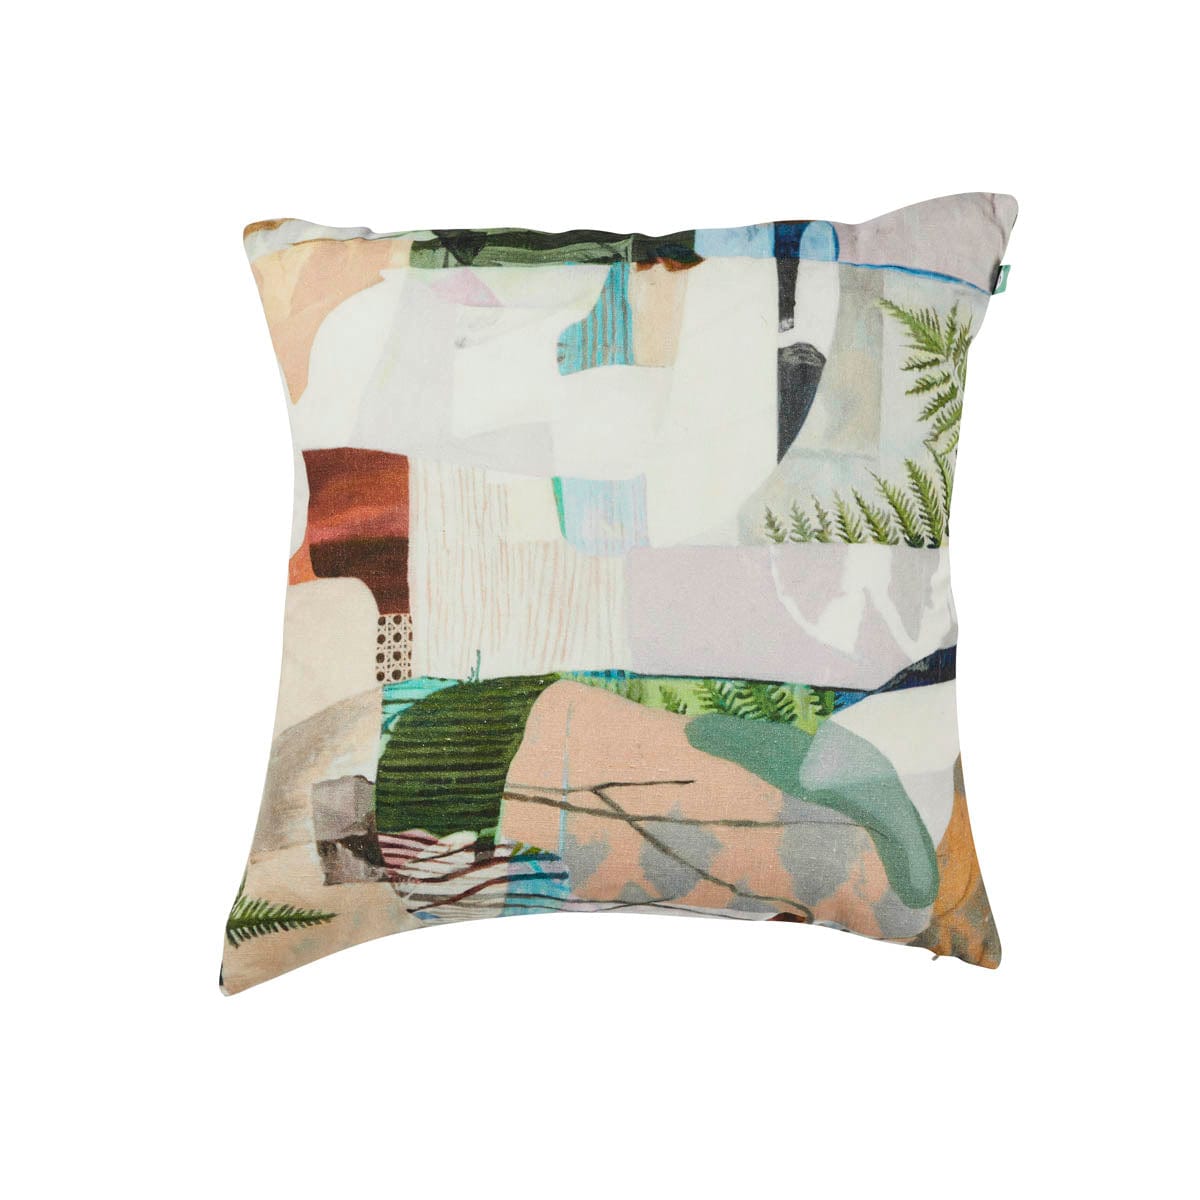 Art Cushion - Love it when a plan comes together